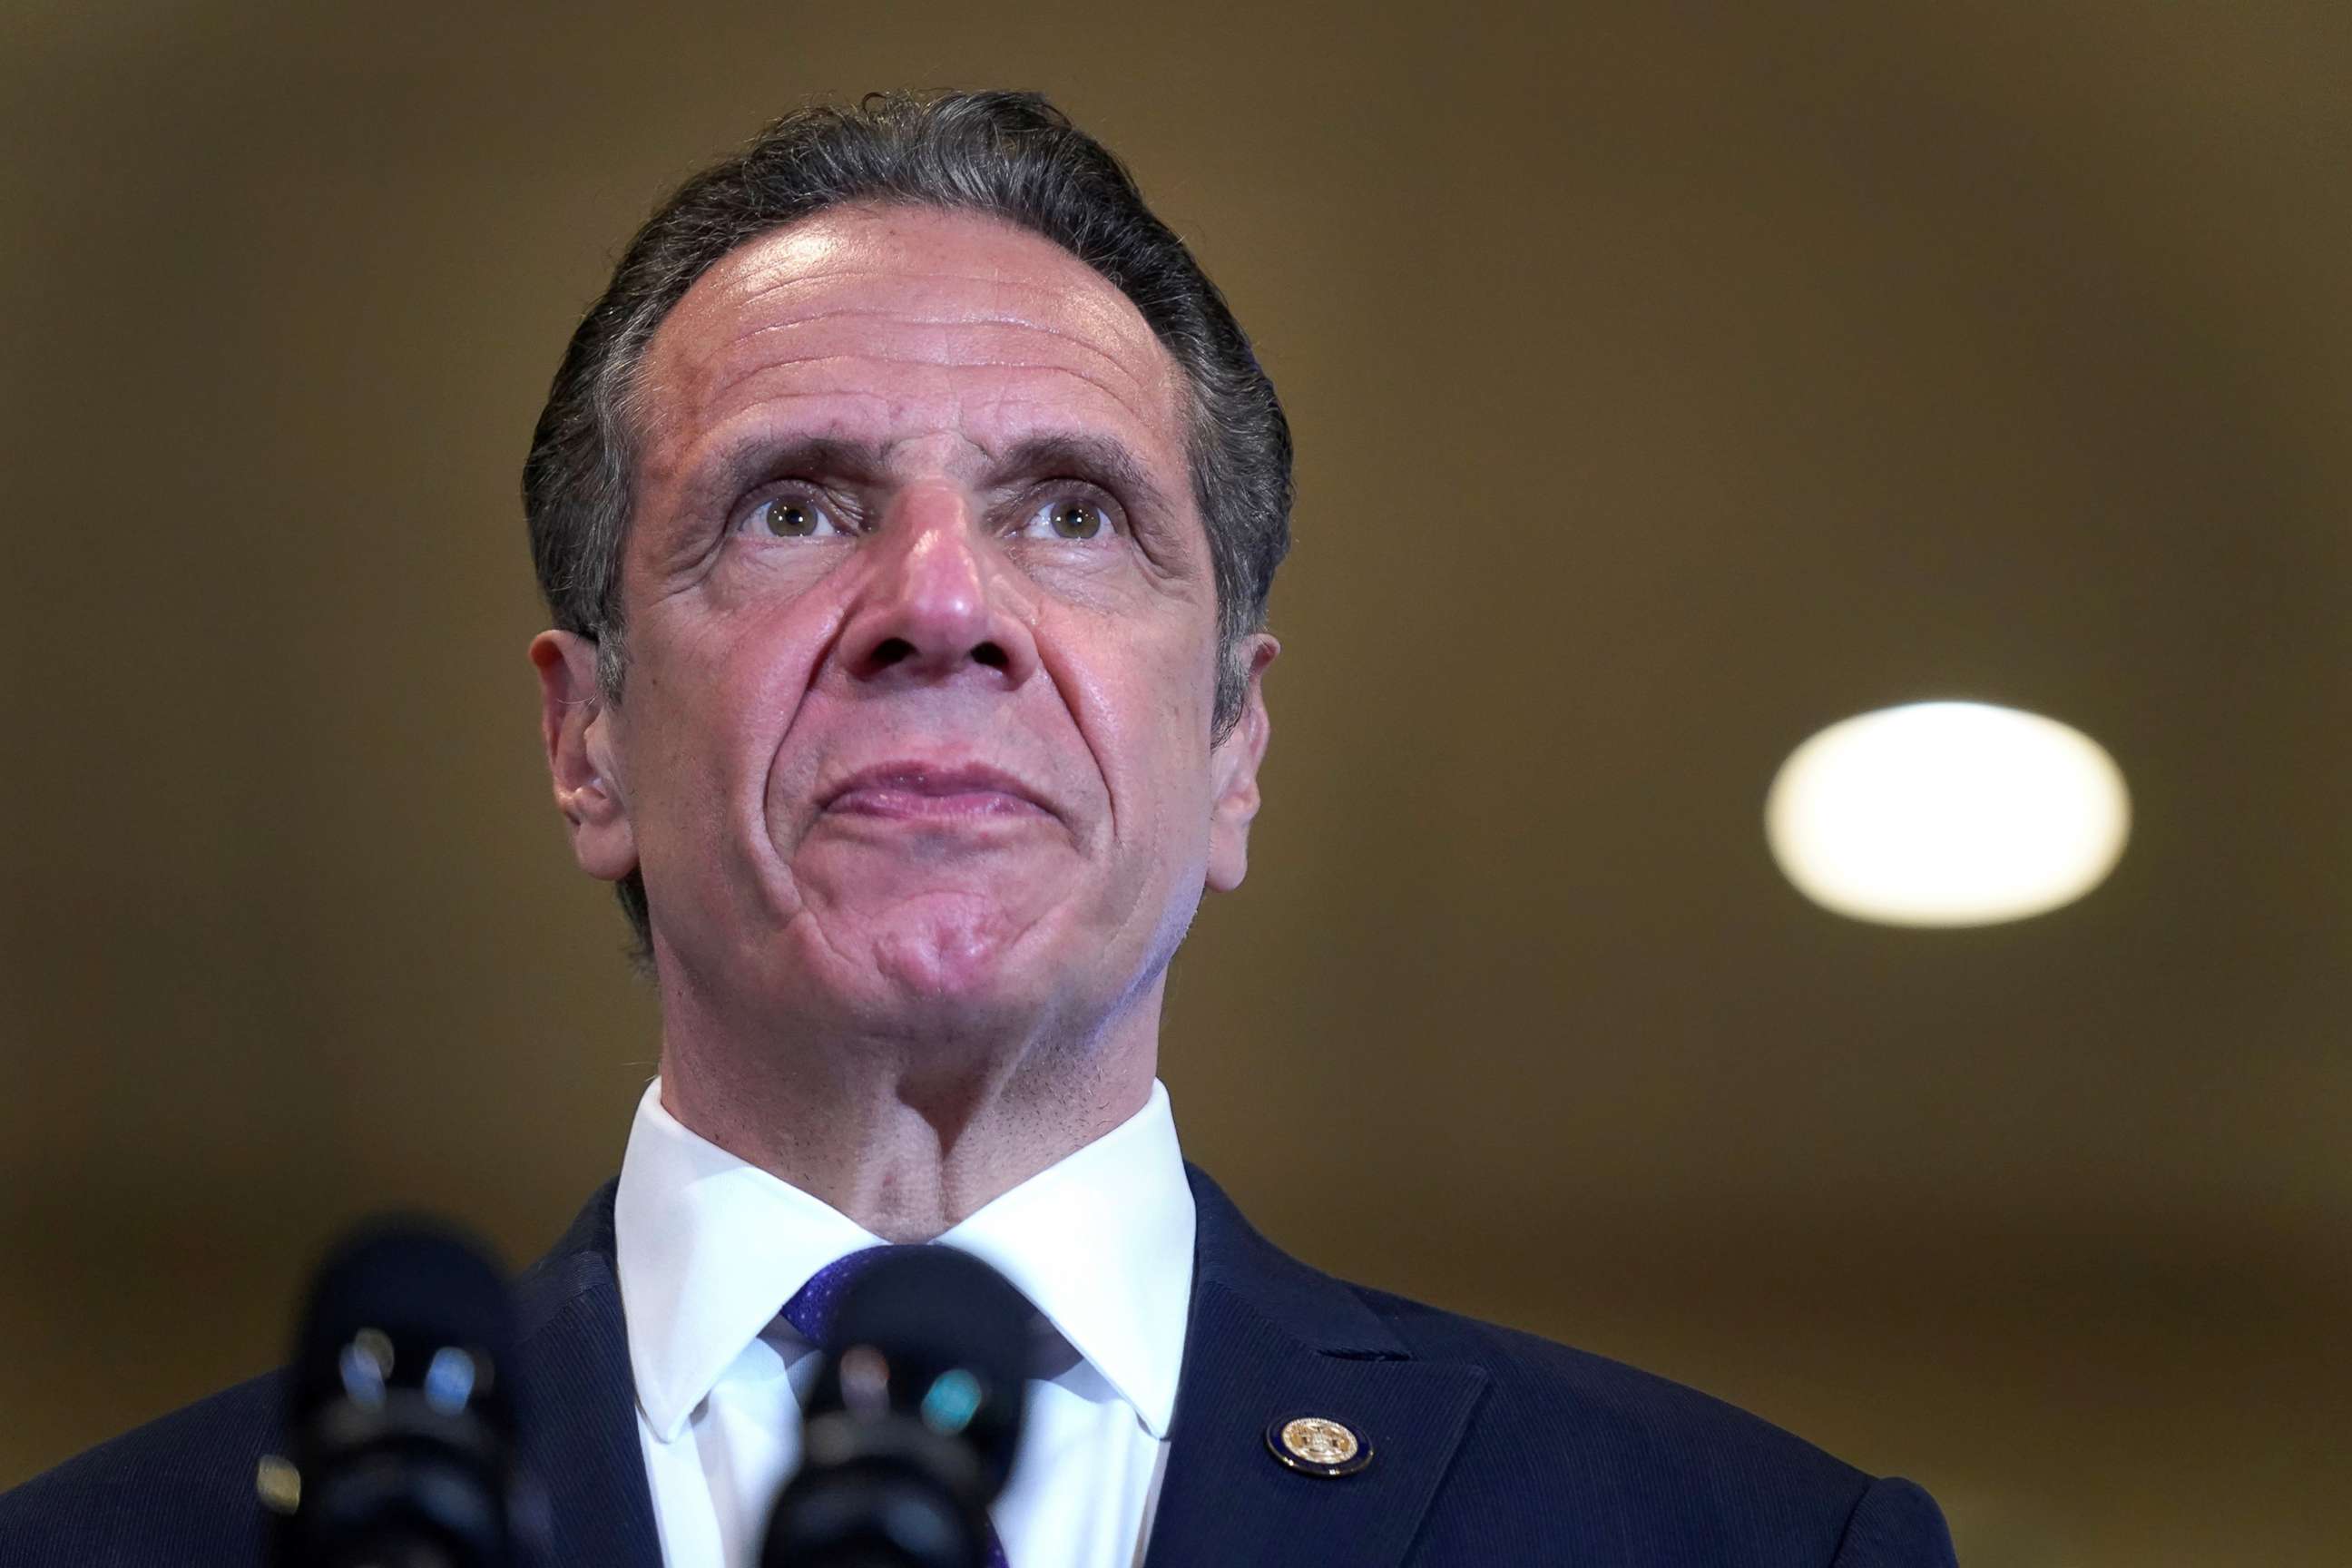 PHOTO: New York Governor Andrew Cuomo listens to speakers in Mt. Vernon, N.Y., March 22, 2021.